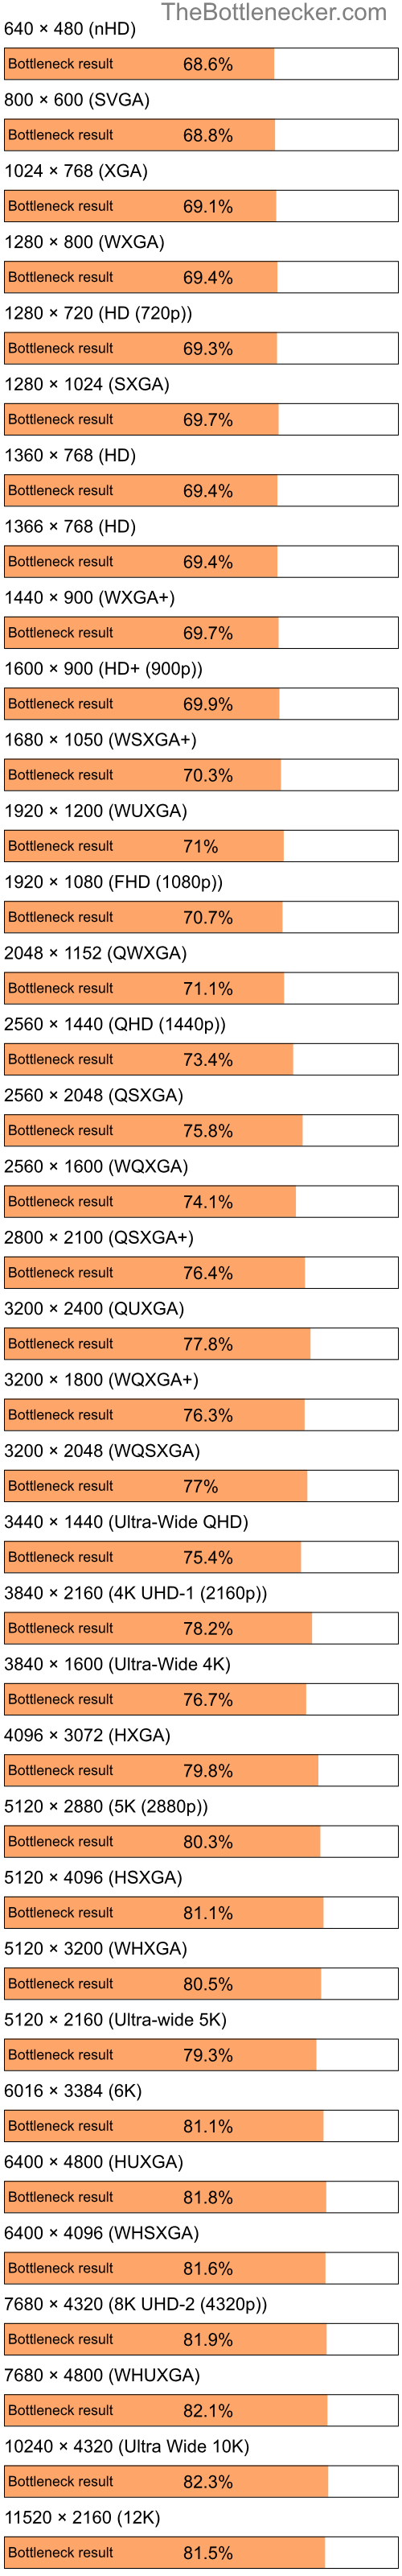 Bottleneck results by resolution for Intel Celeron and NVIDIA GeForce Go 6800 in Graphic Card Intense Tasks